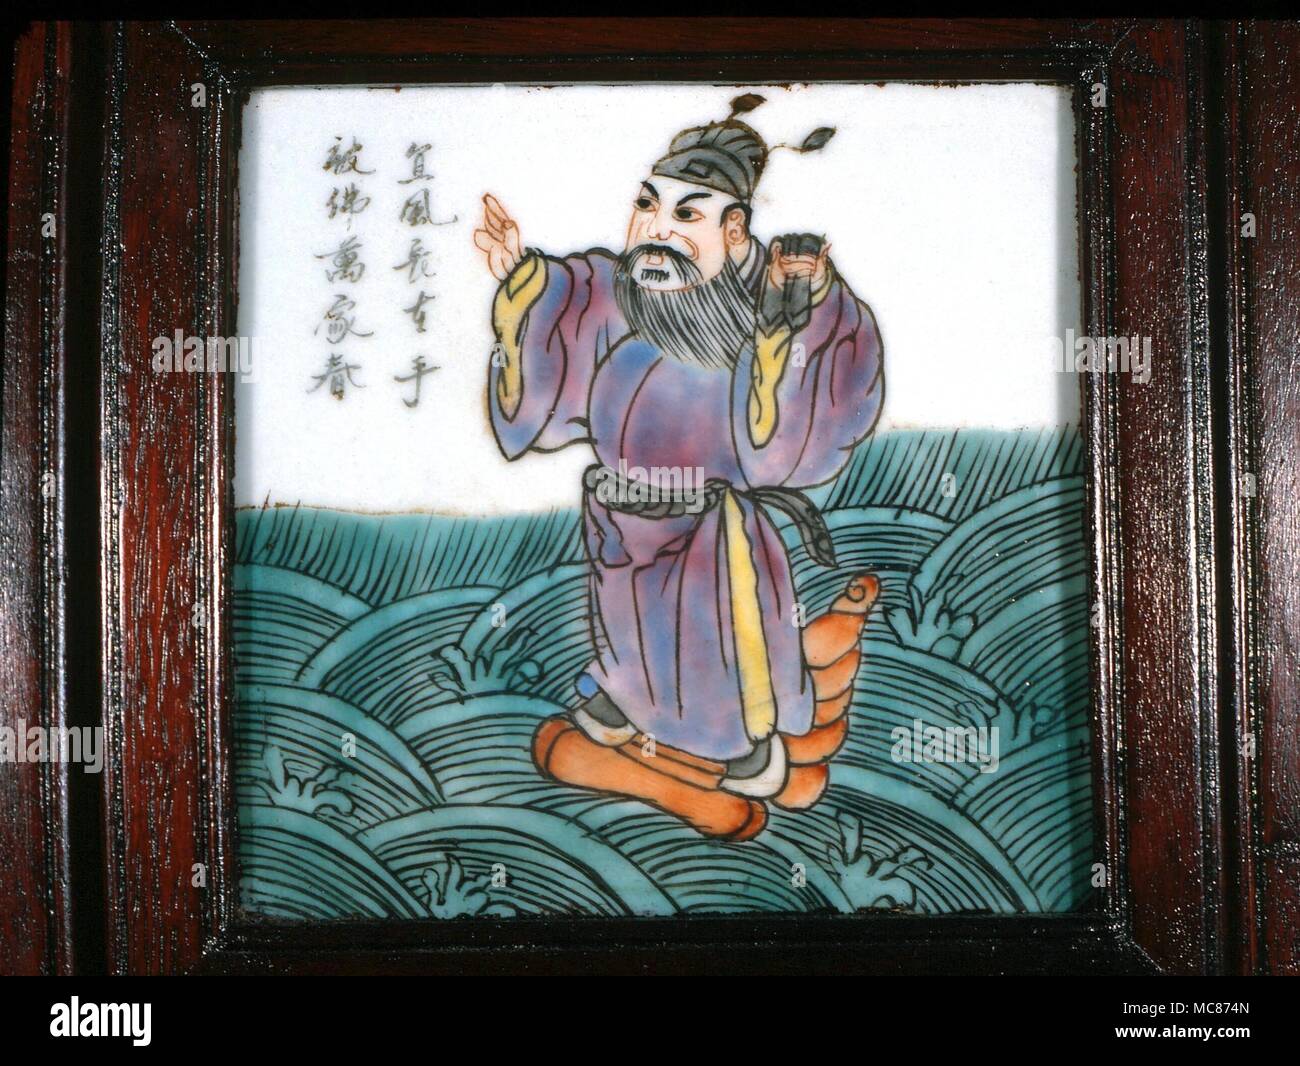 Taoism - One of the Taoist 'Eight Immortals- (Pa Hsien). Ts'ao Kuo-chin, who usually carries castanets, and who is patron of the Theatrical profession. Mid-19th century Chinese tile, from a screen Stock Photo